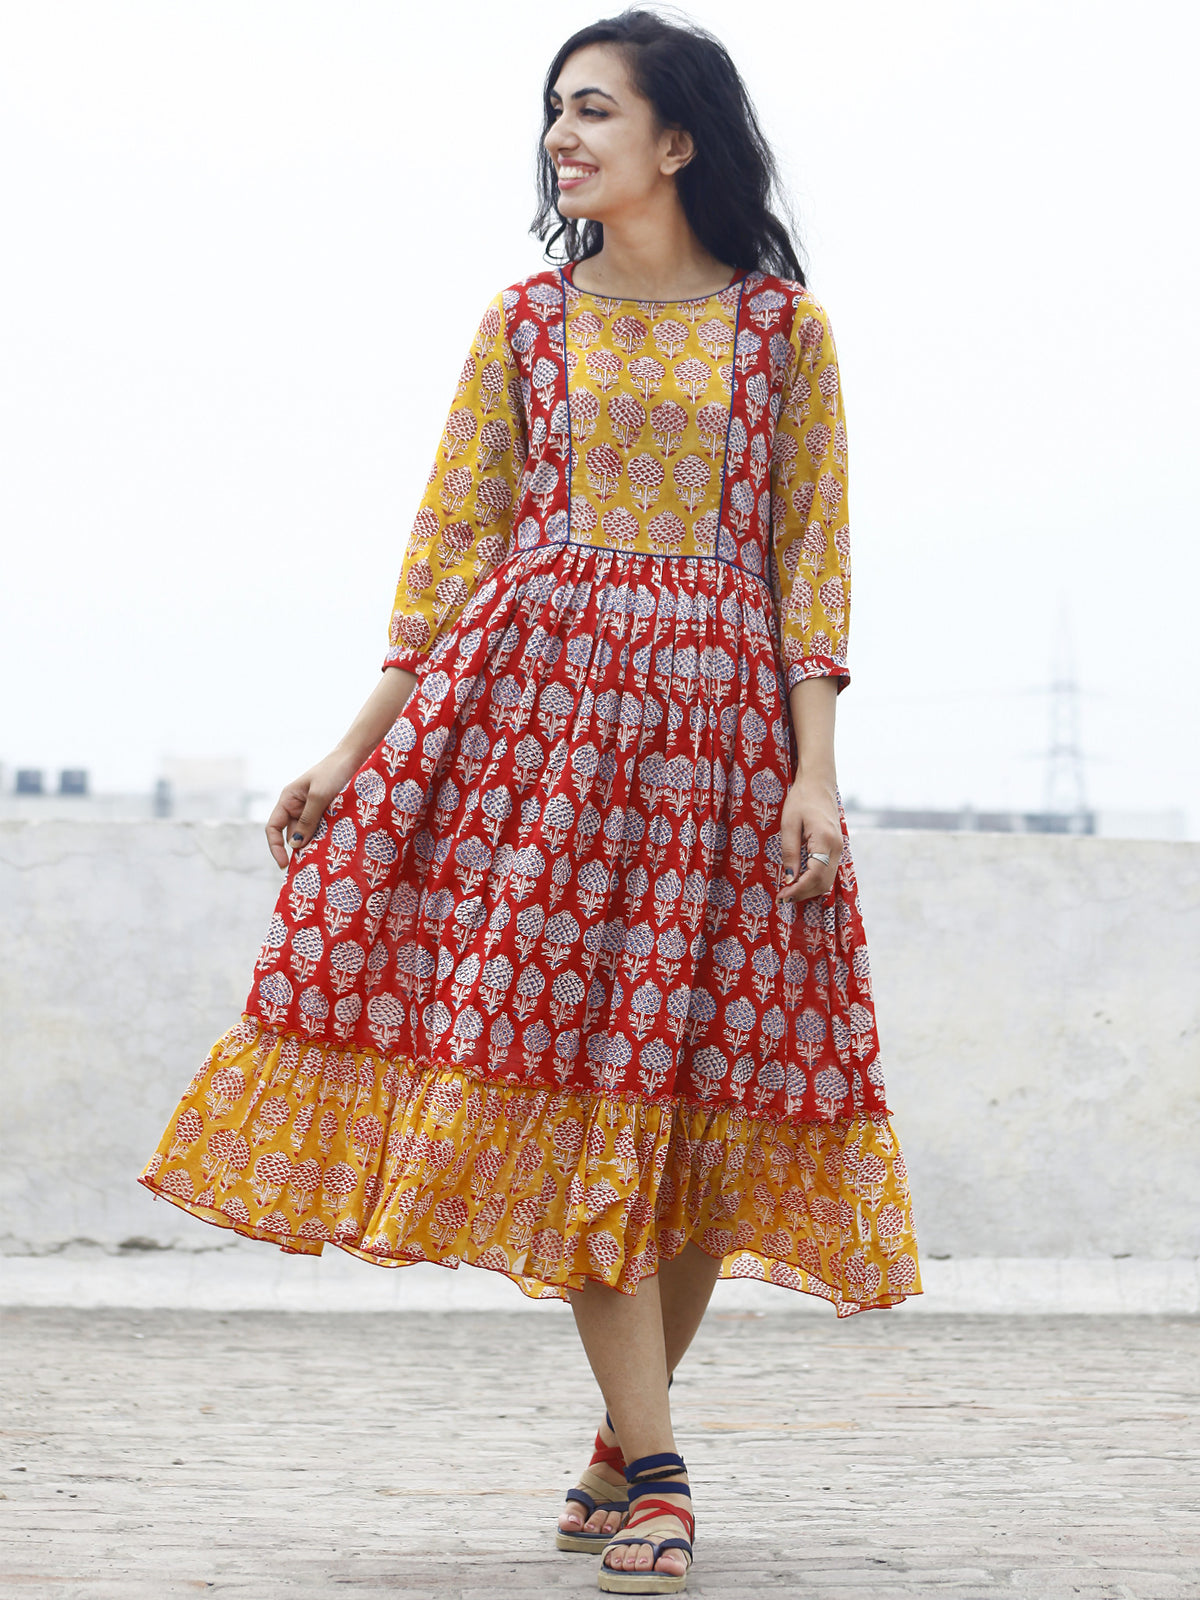 Red Yellow Blue ivory Hand block Printed Dress With Gathers And Peasant Sleeves  - D77F780